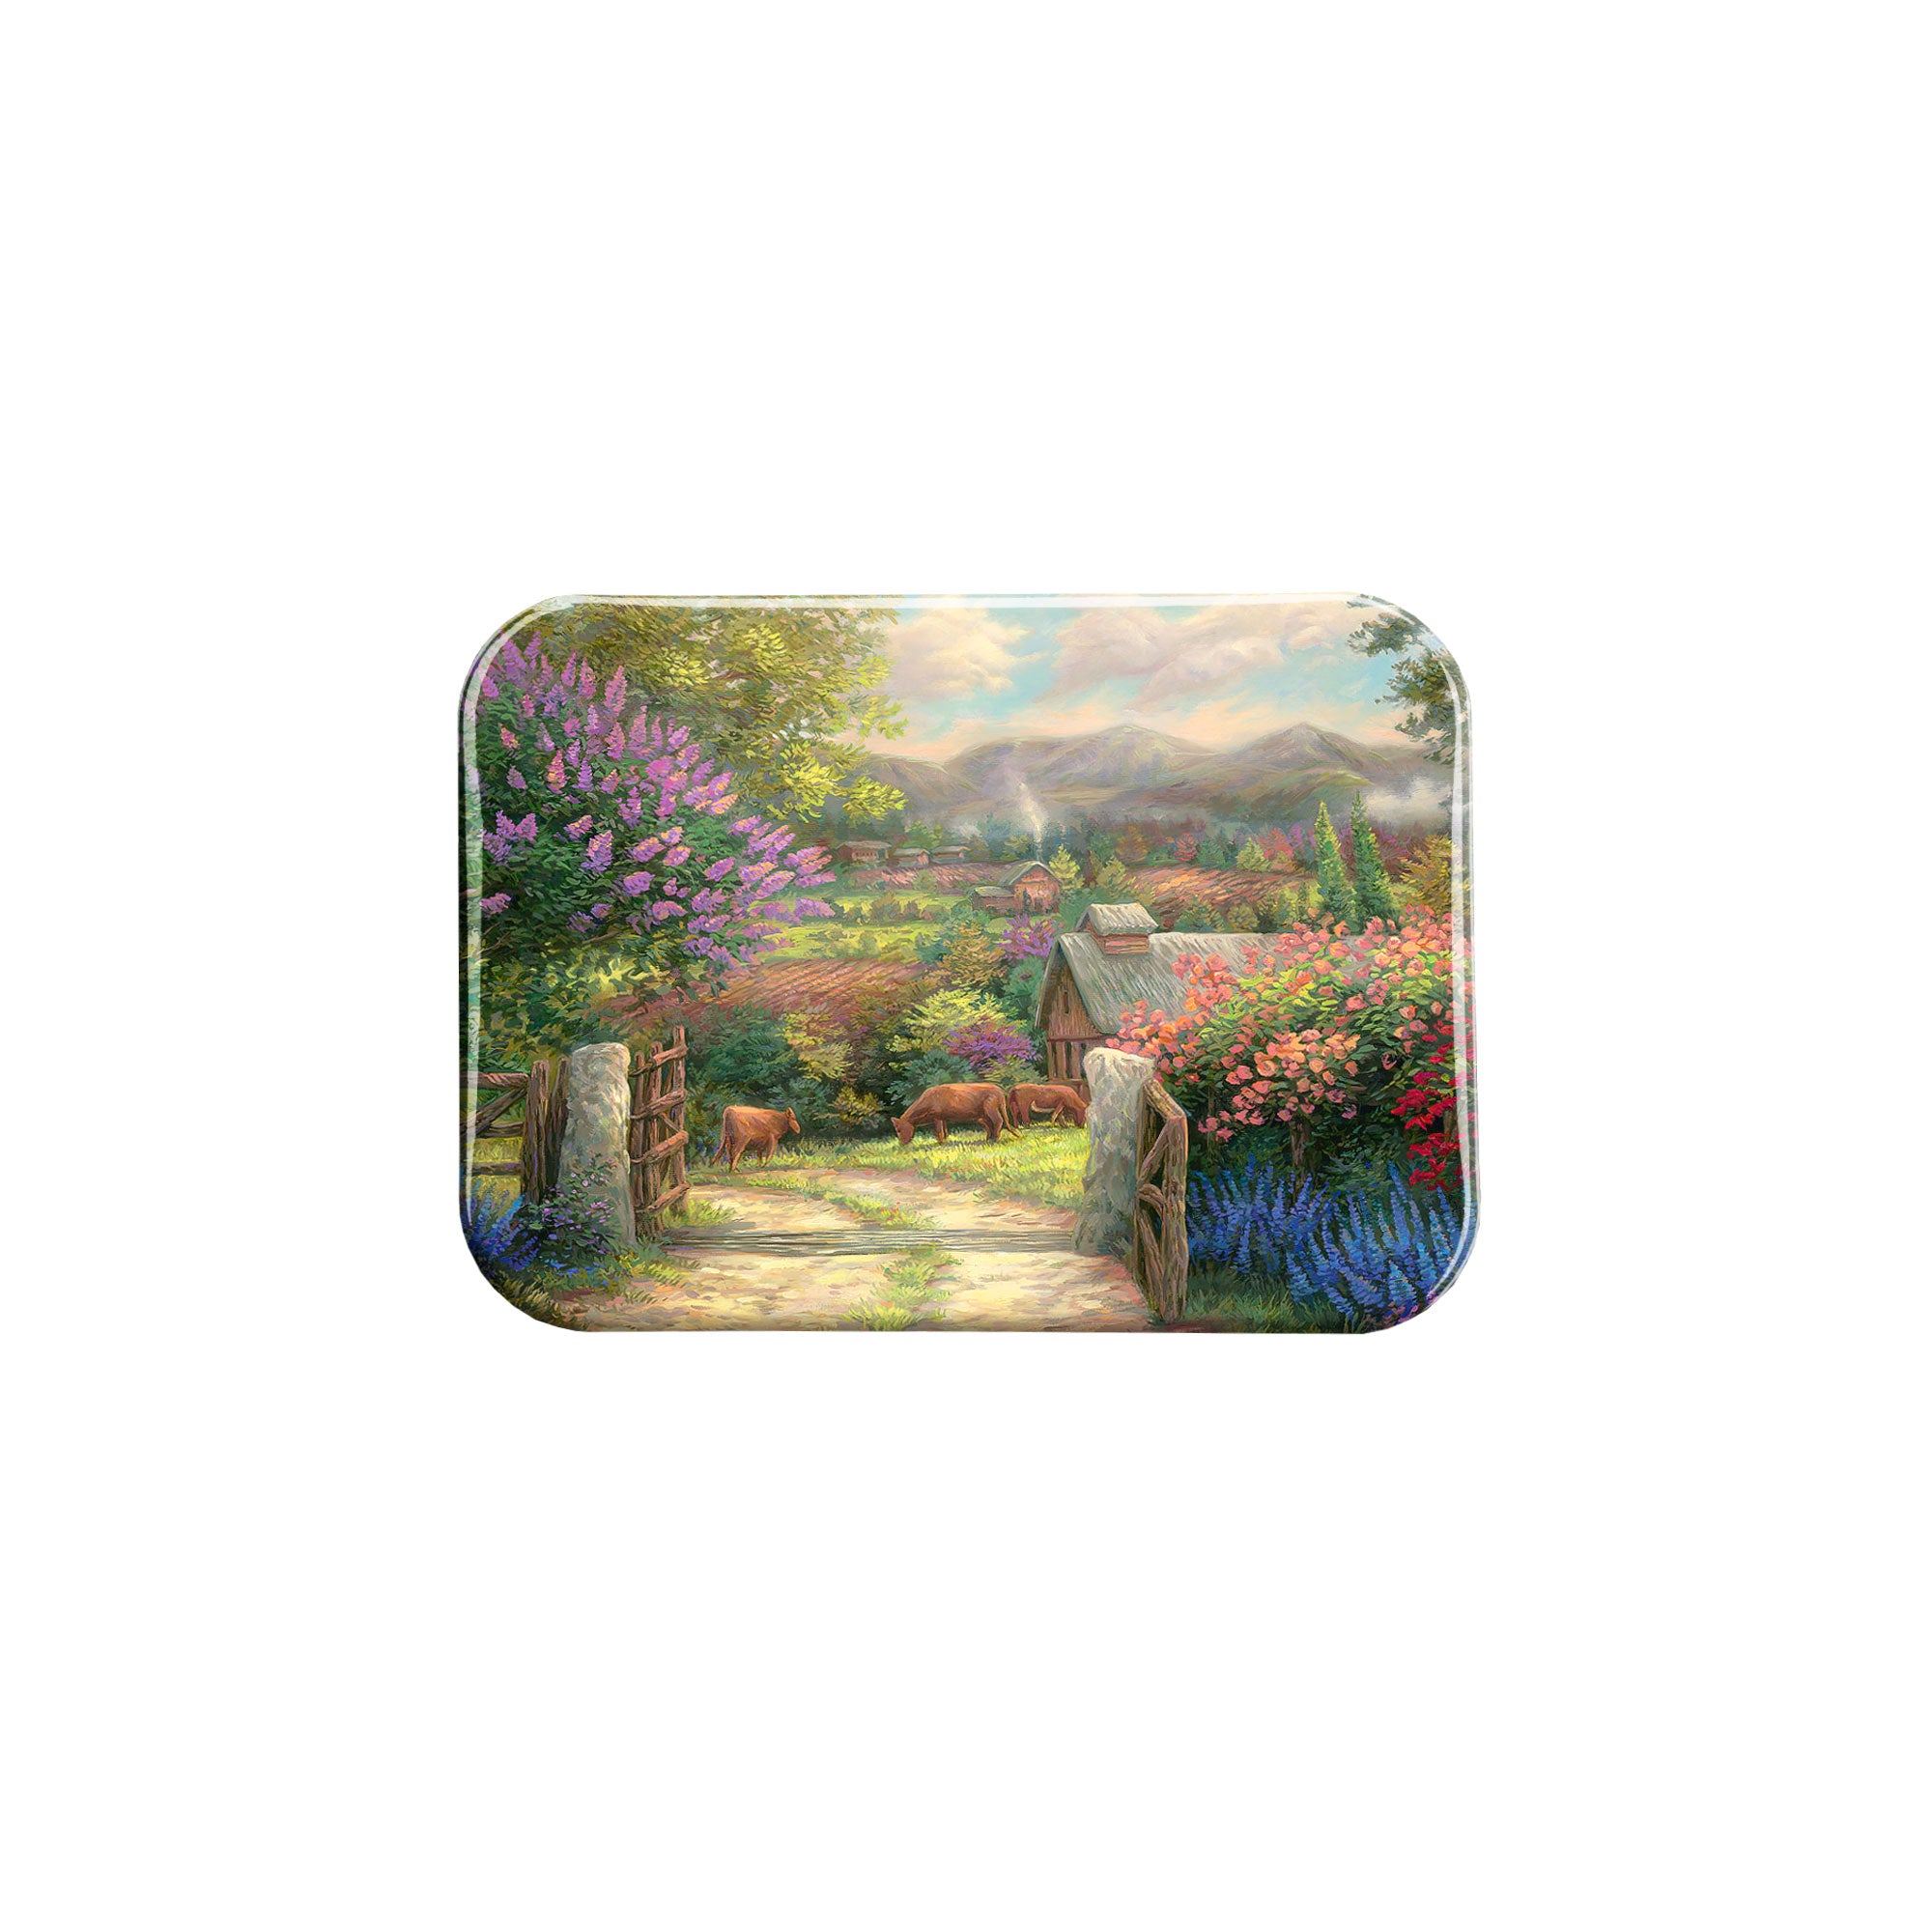 "Country Gate" - 2.5" X 3.5" Rectangle Fridge Magnets